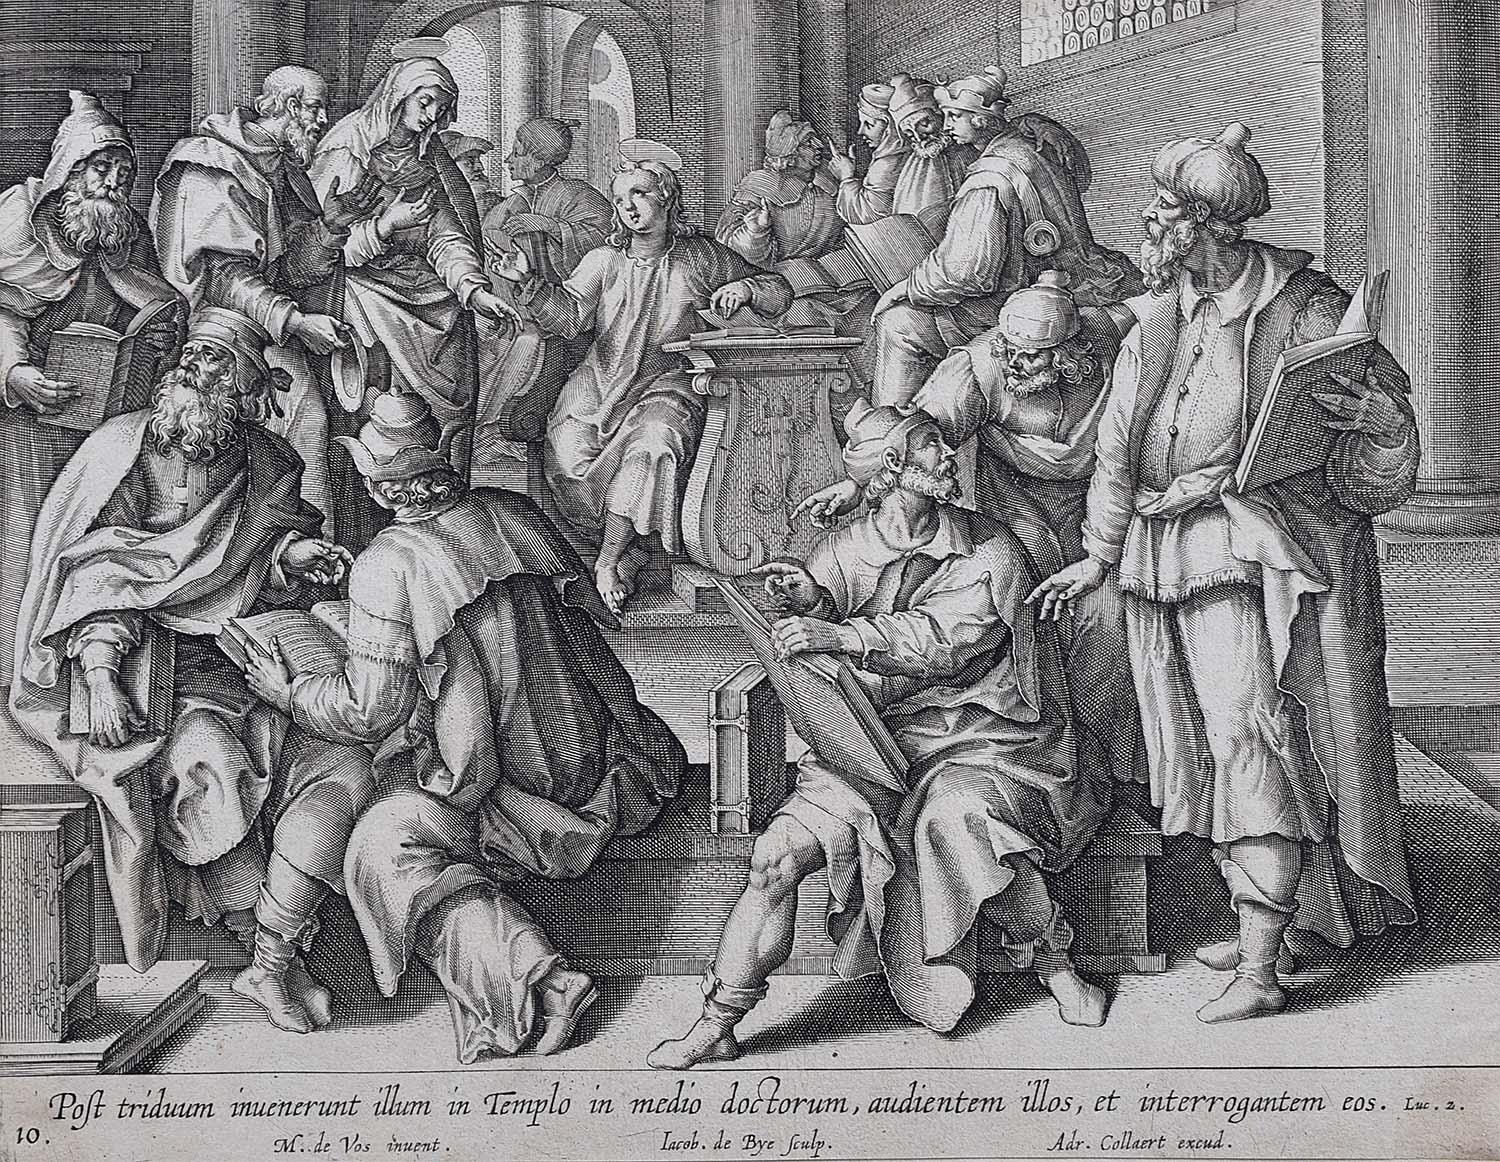 Adrian Collaert 17th C. de vos engraving Christ in the Temple with the Doctors